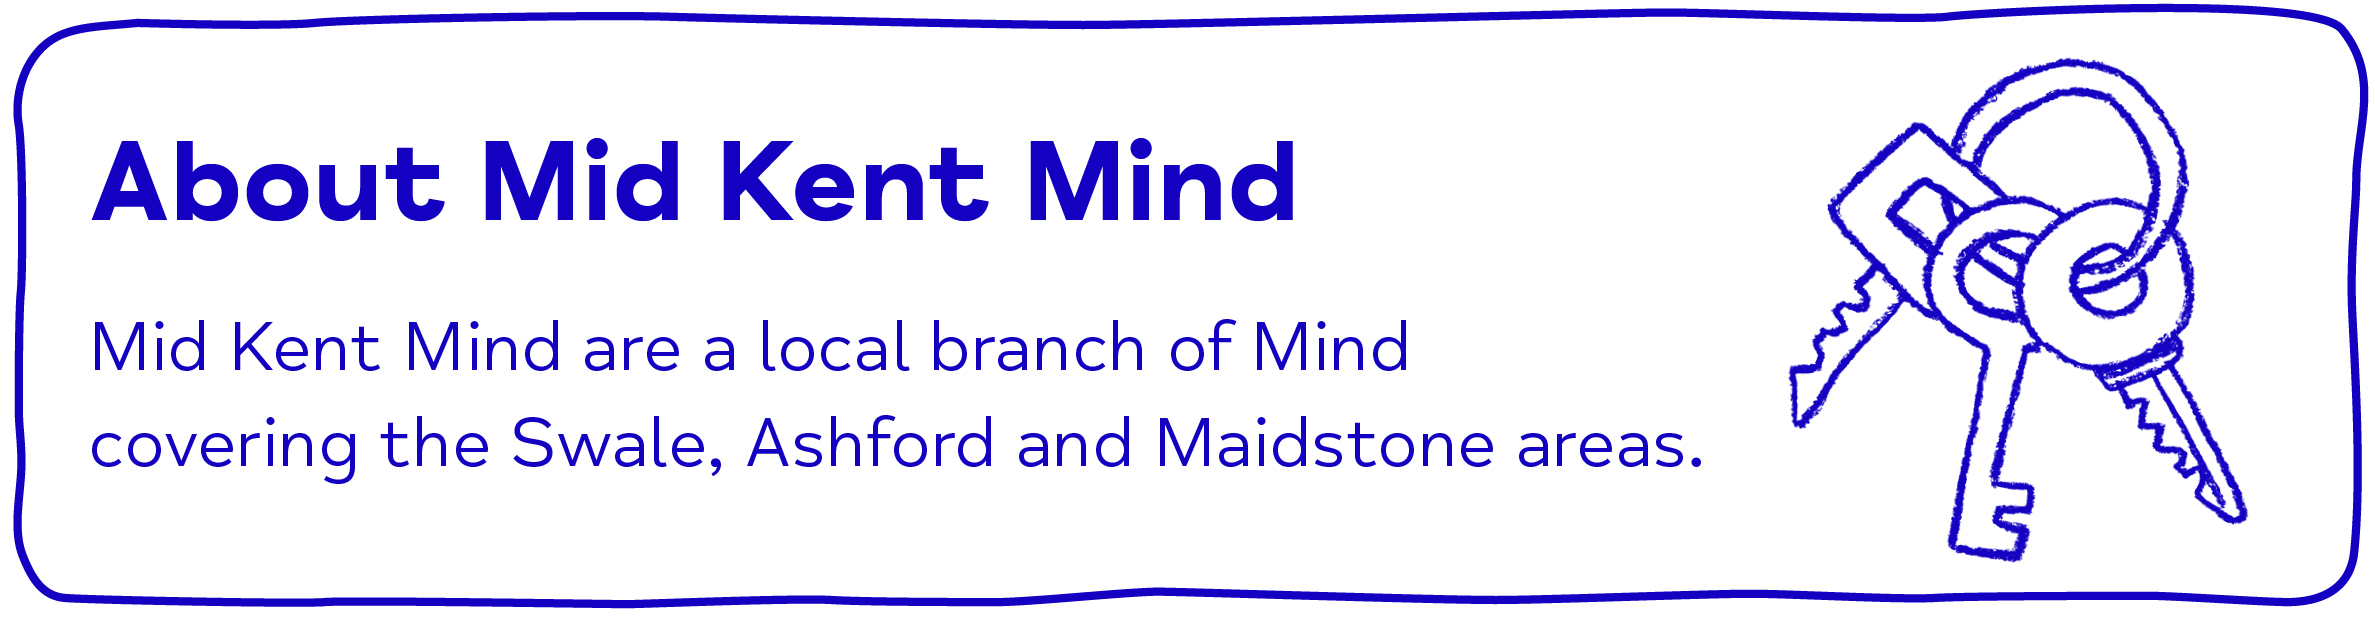 About Mid Kent Mind Mid Kent Mind are a local branch of Mind      covering the Swale, Ashford and Maidstone areas.